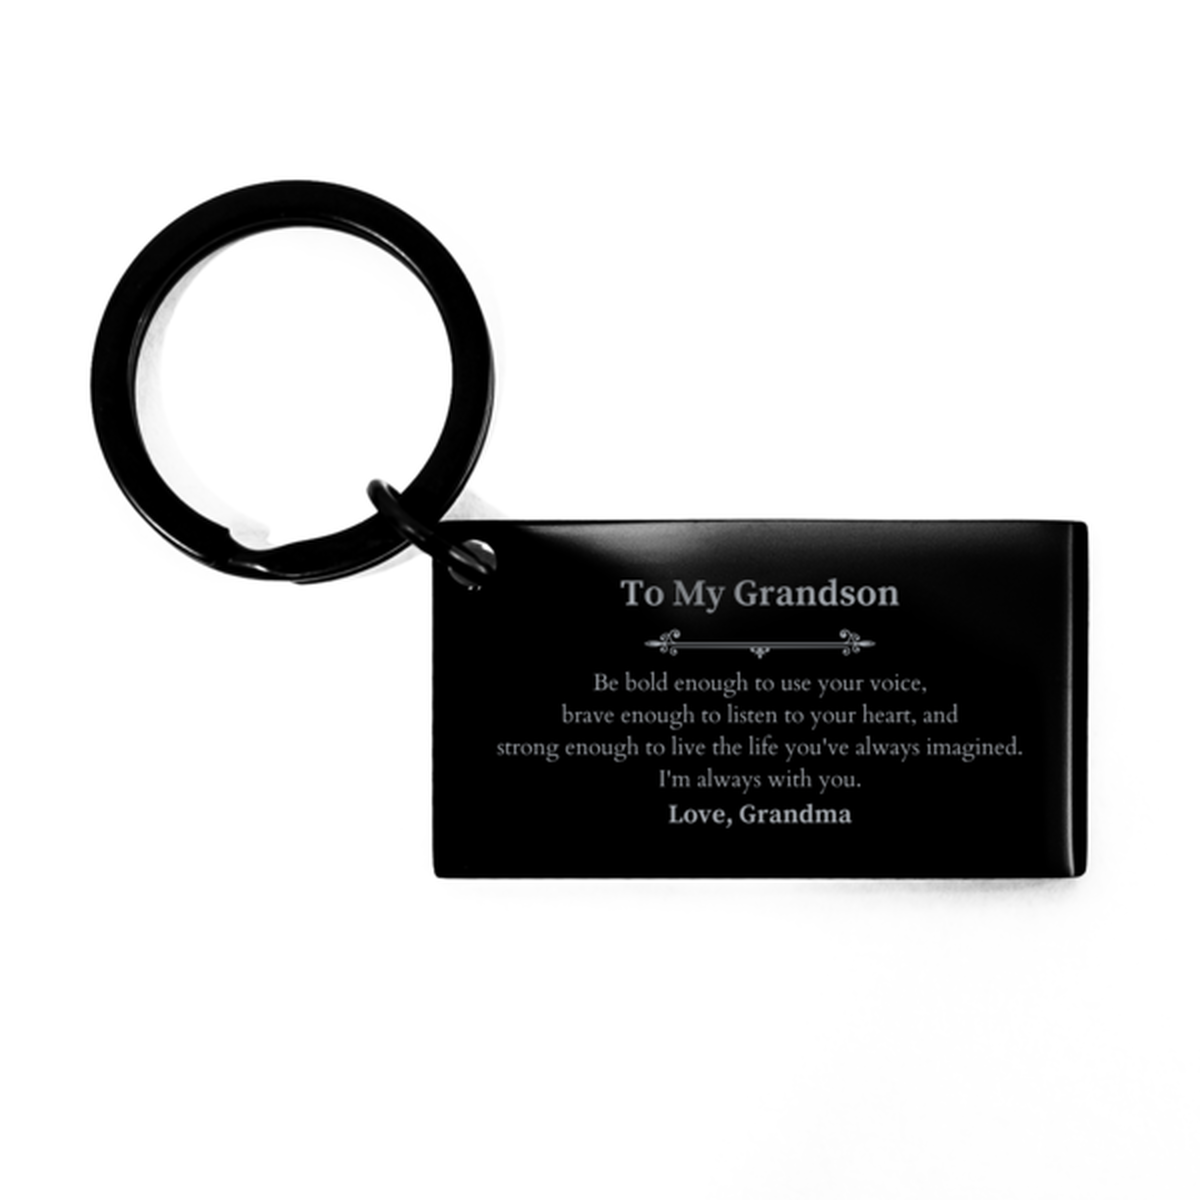 Keepsake Grandson Keychain Gift Idea Graduation Christmas Birthday Grandson from Grandma, Grandson Be bold enough to use your voice, brave enough to listen to your heart. Love, Grandma